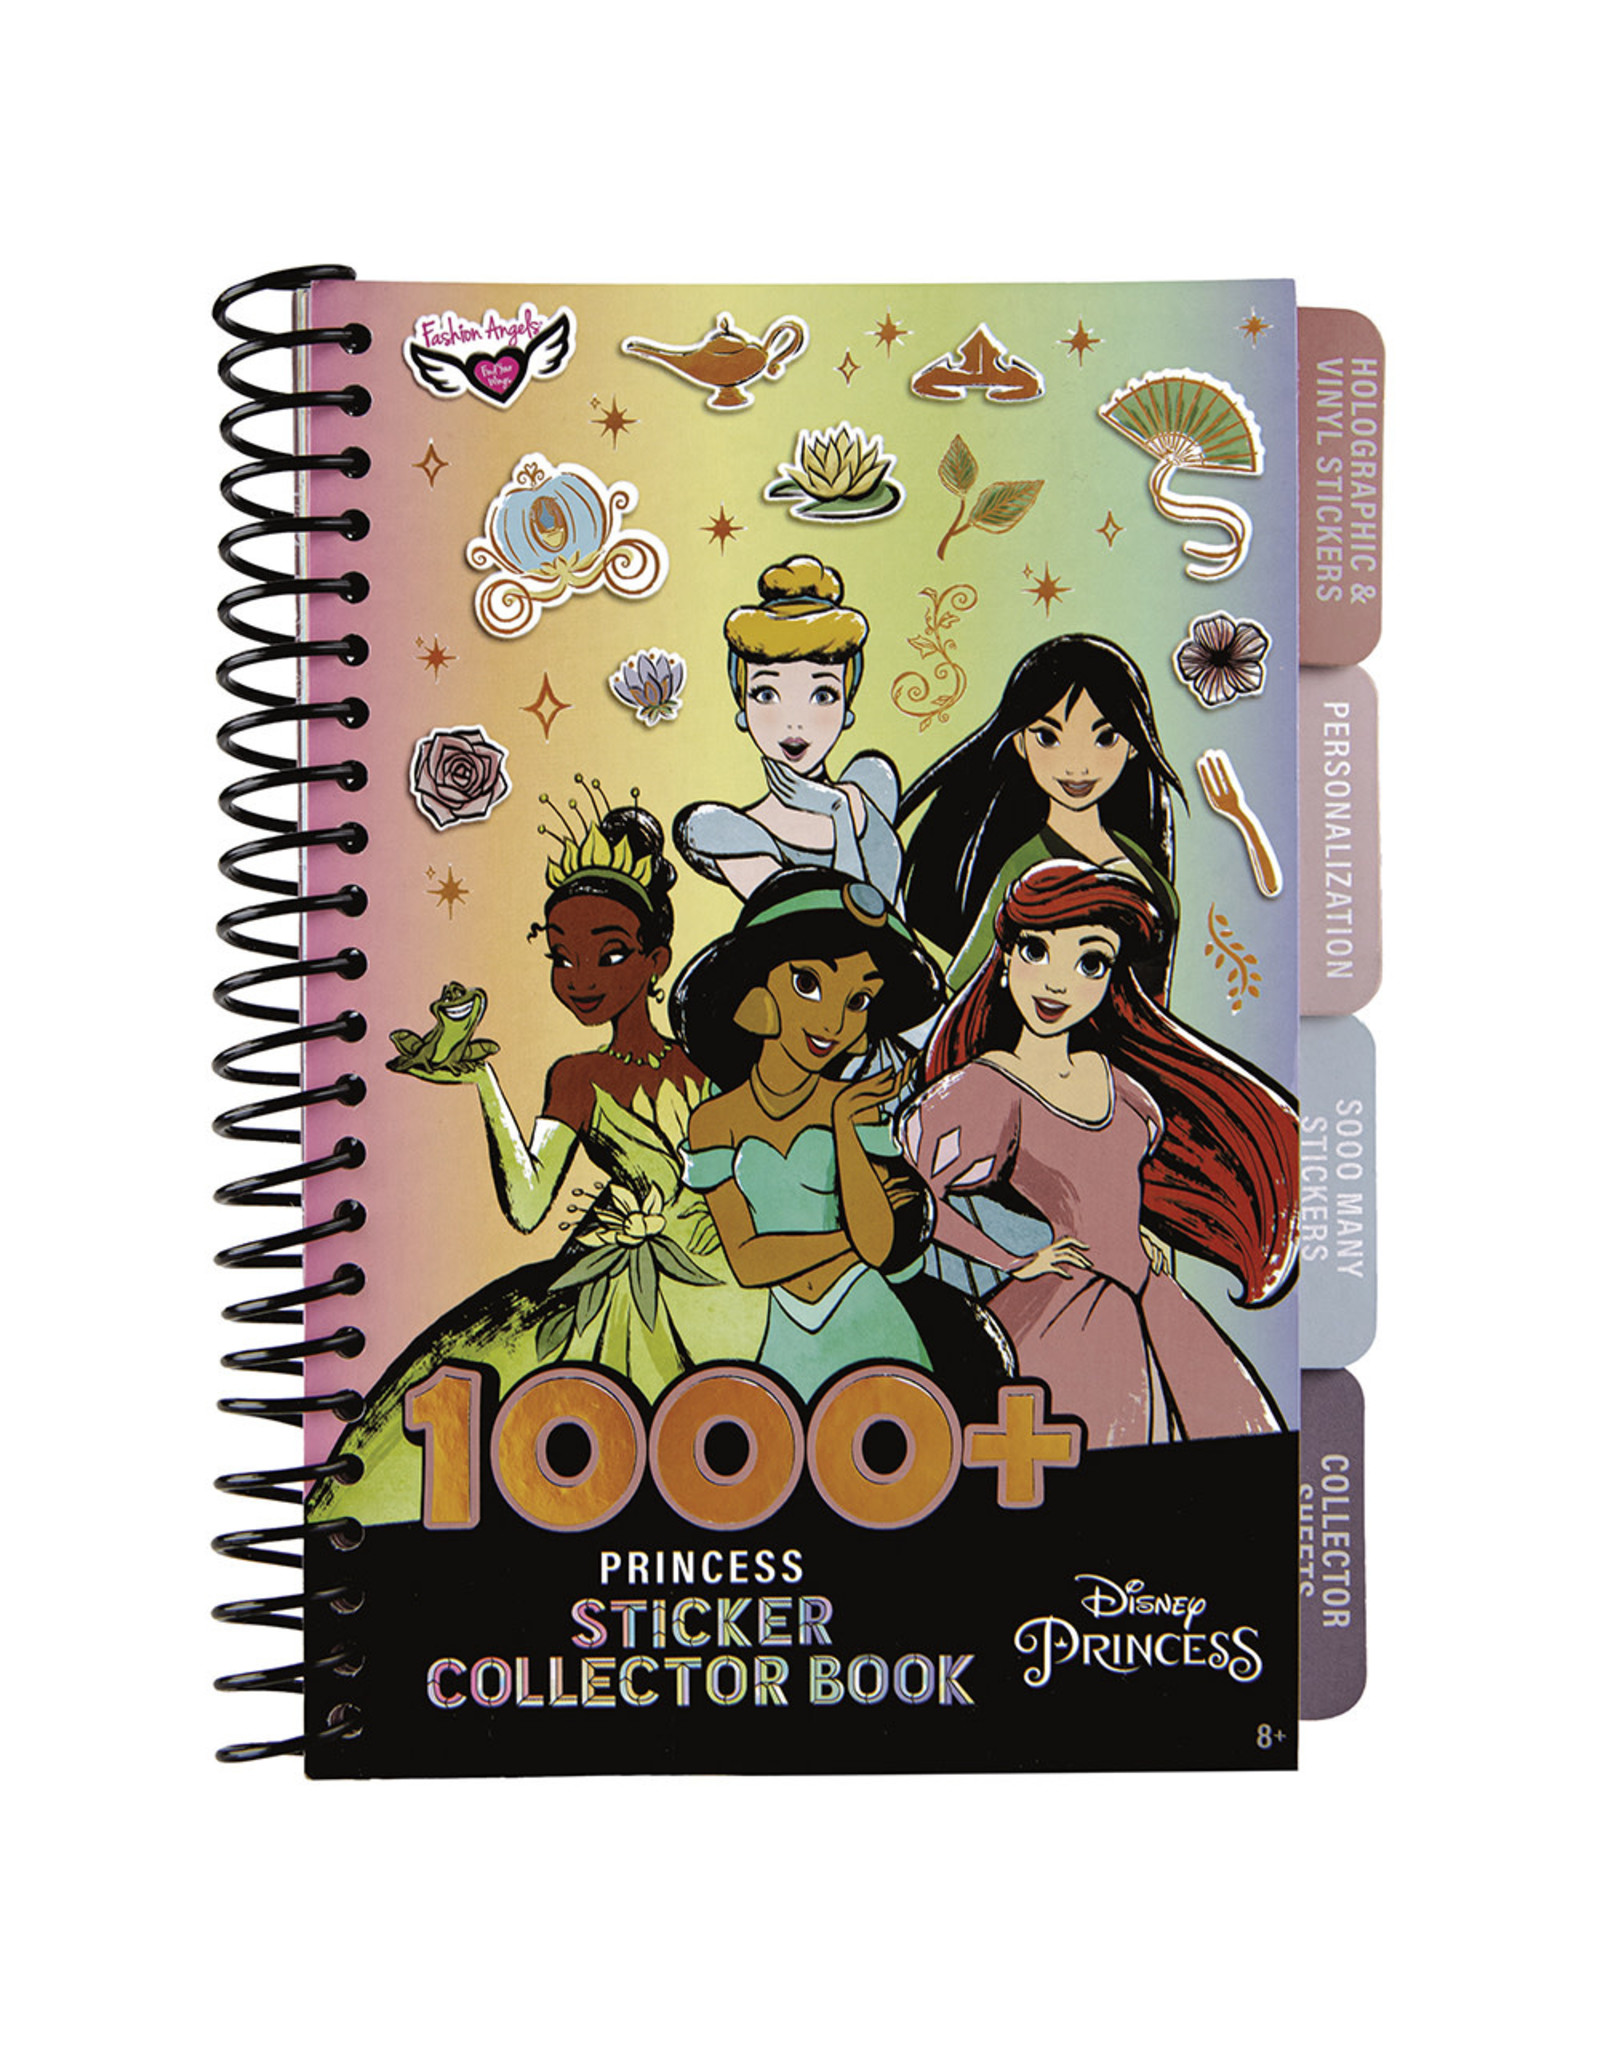 Fashion Angels - Disney Princess 1000+ Stickers & Collector Book